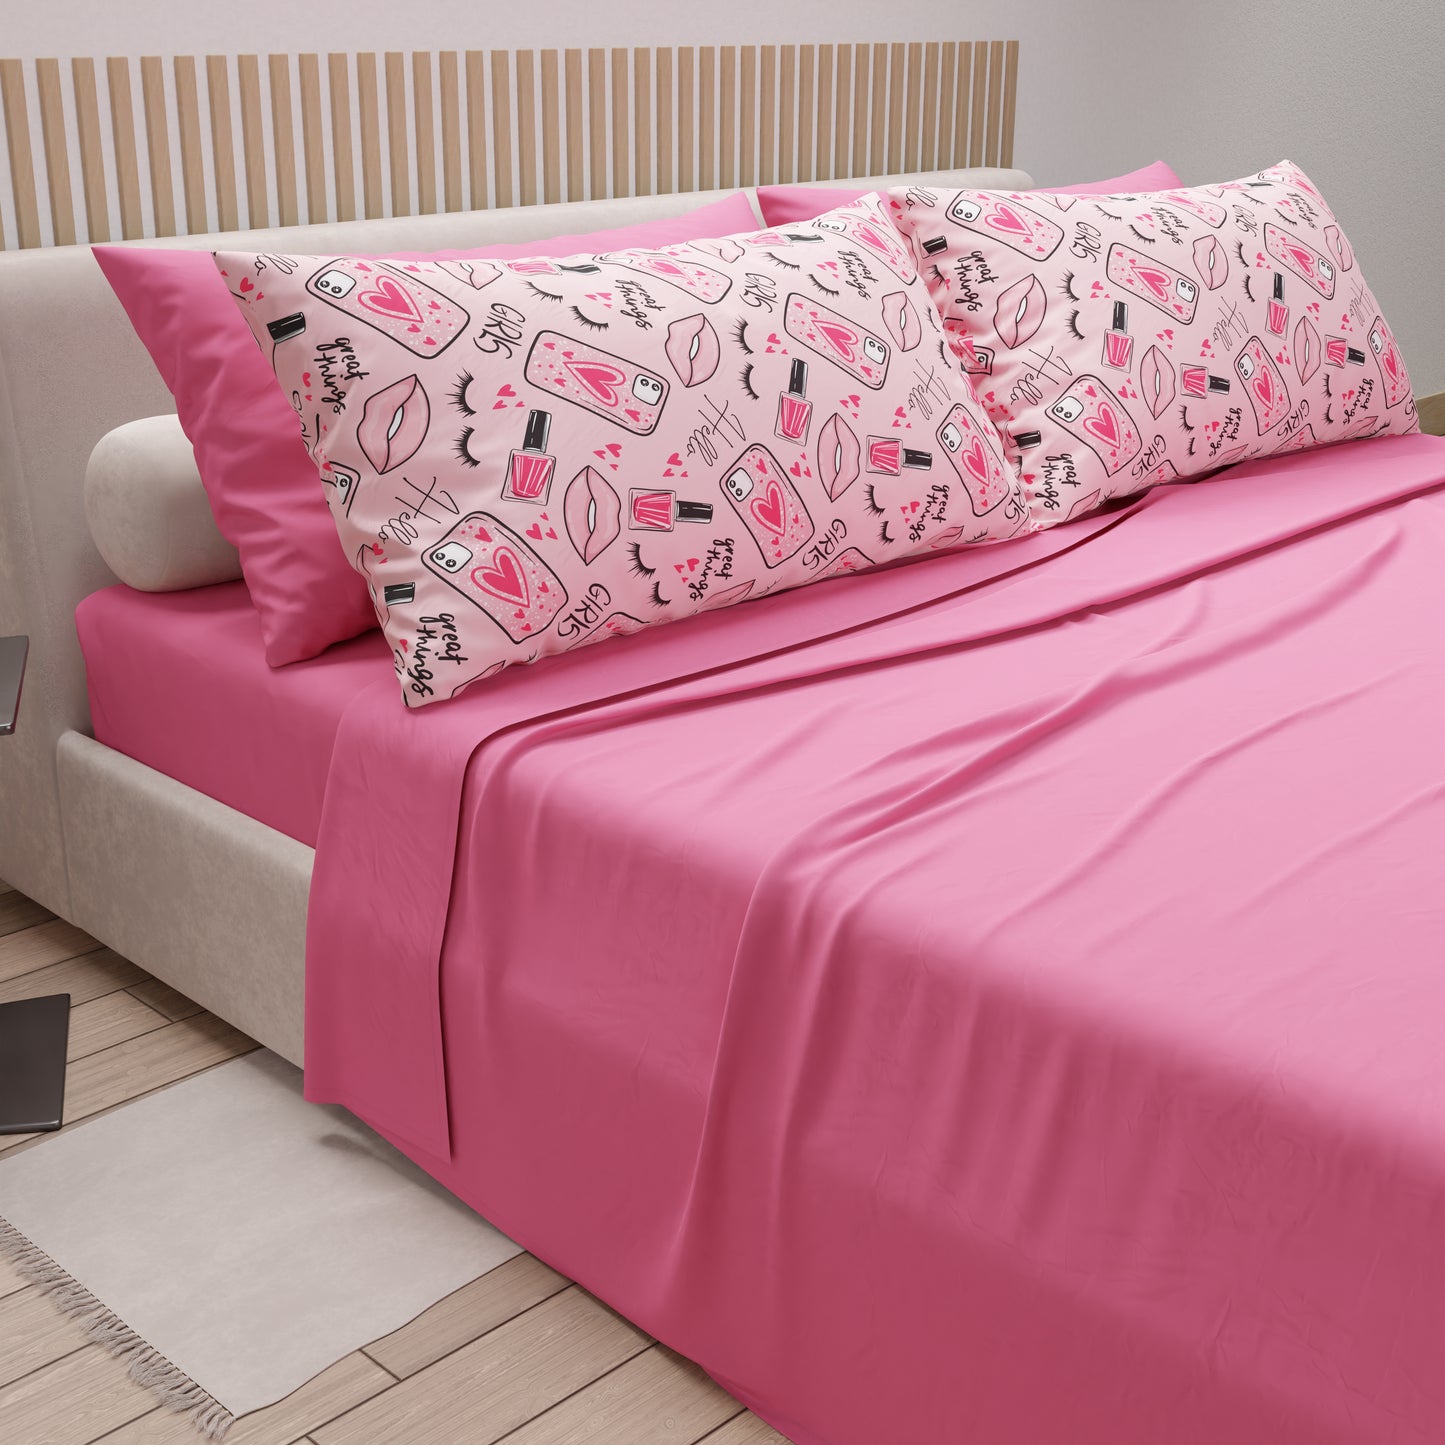 Cotton Sheets, Bed Set with Pink Lipstick Digital Print Pillowcases